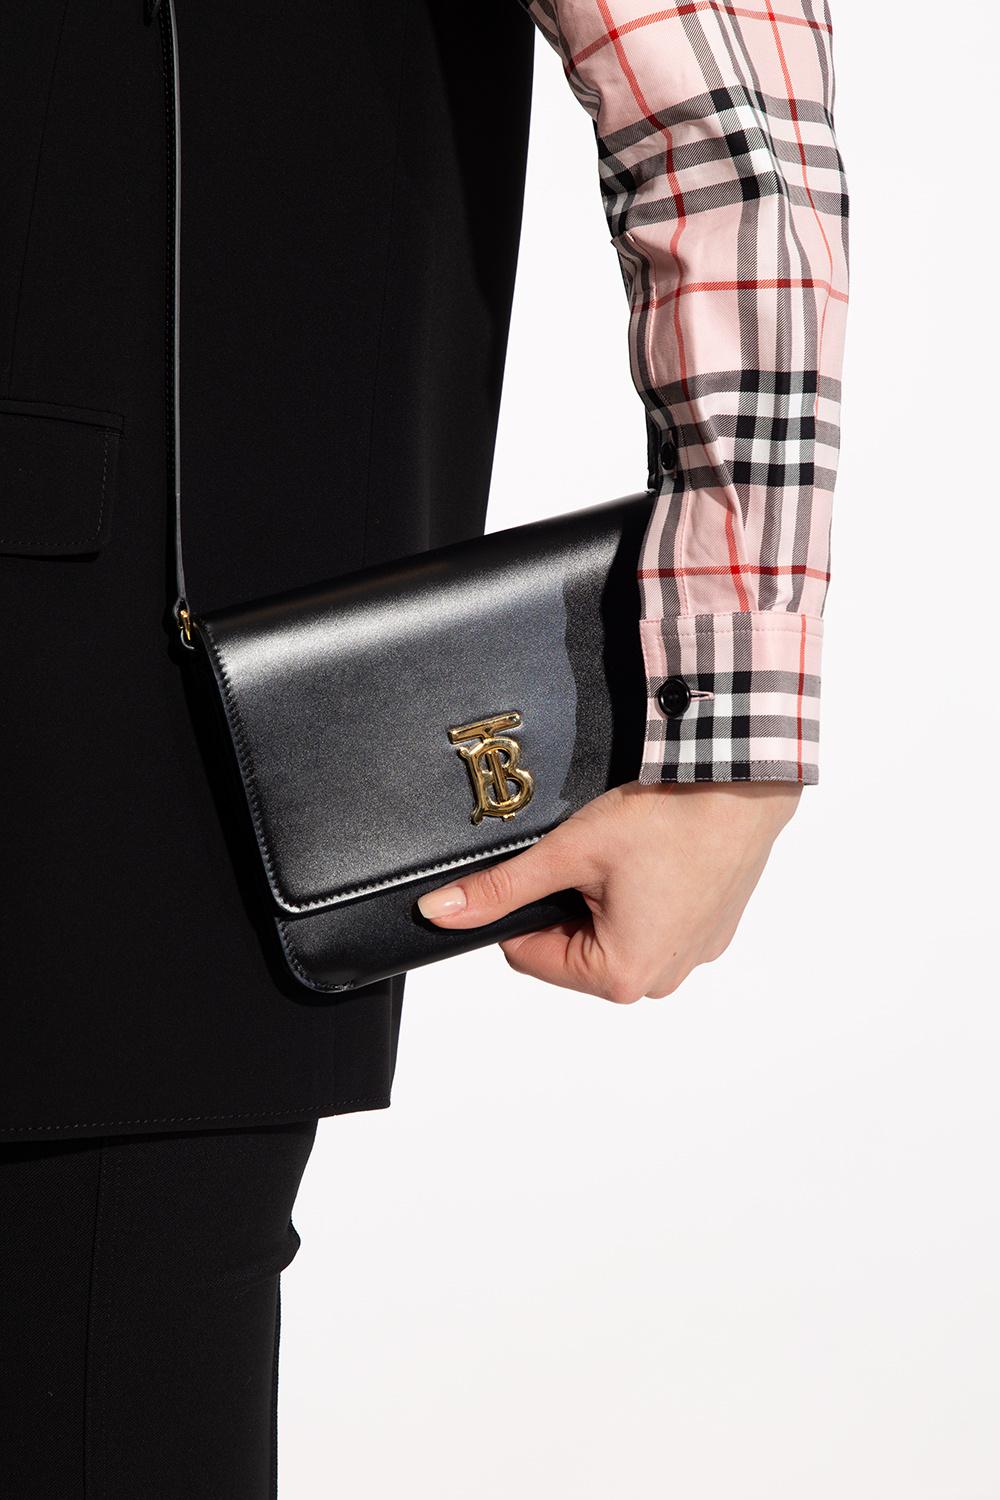 Celine Triomphe compact wallet + Burberry TB logo checkered bag